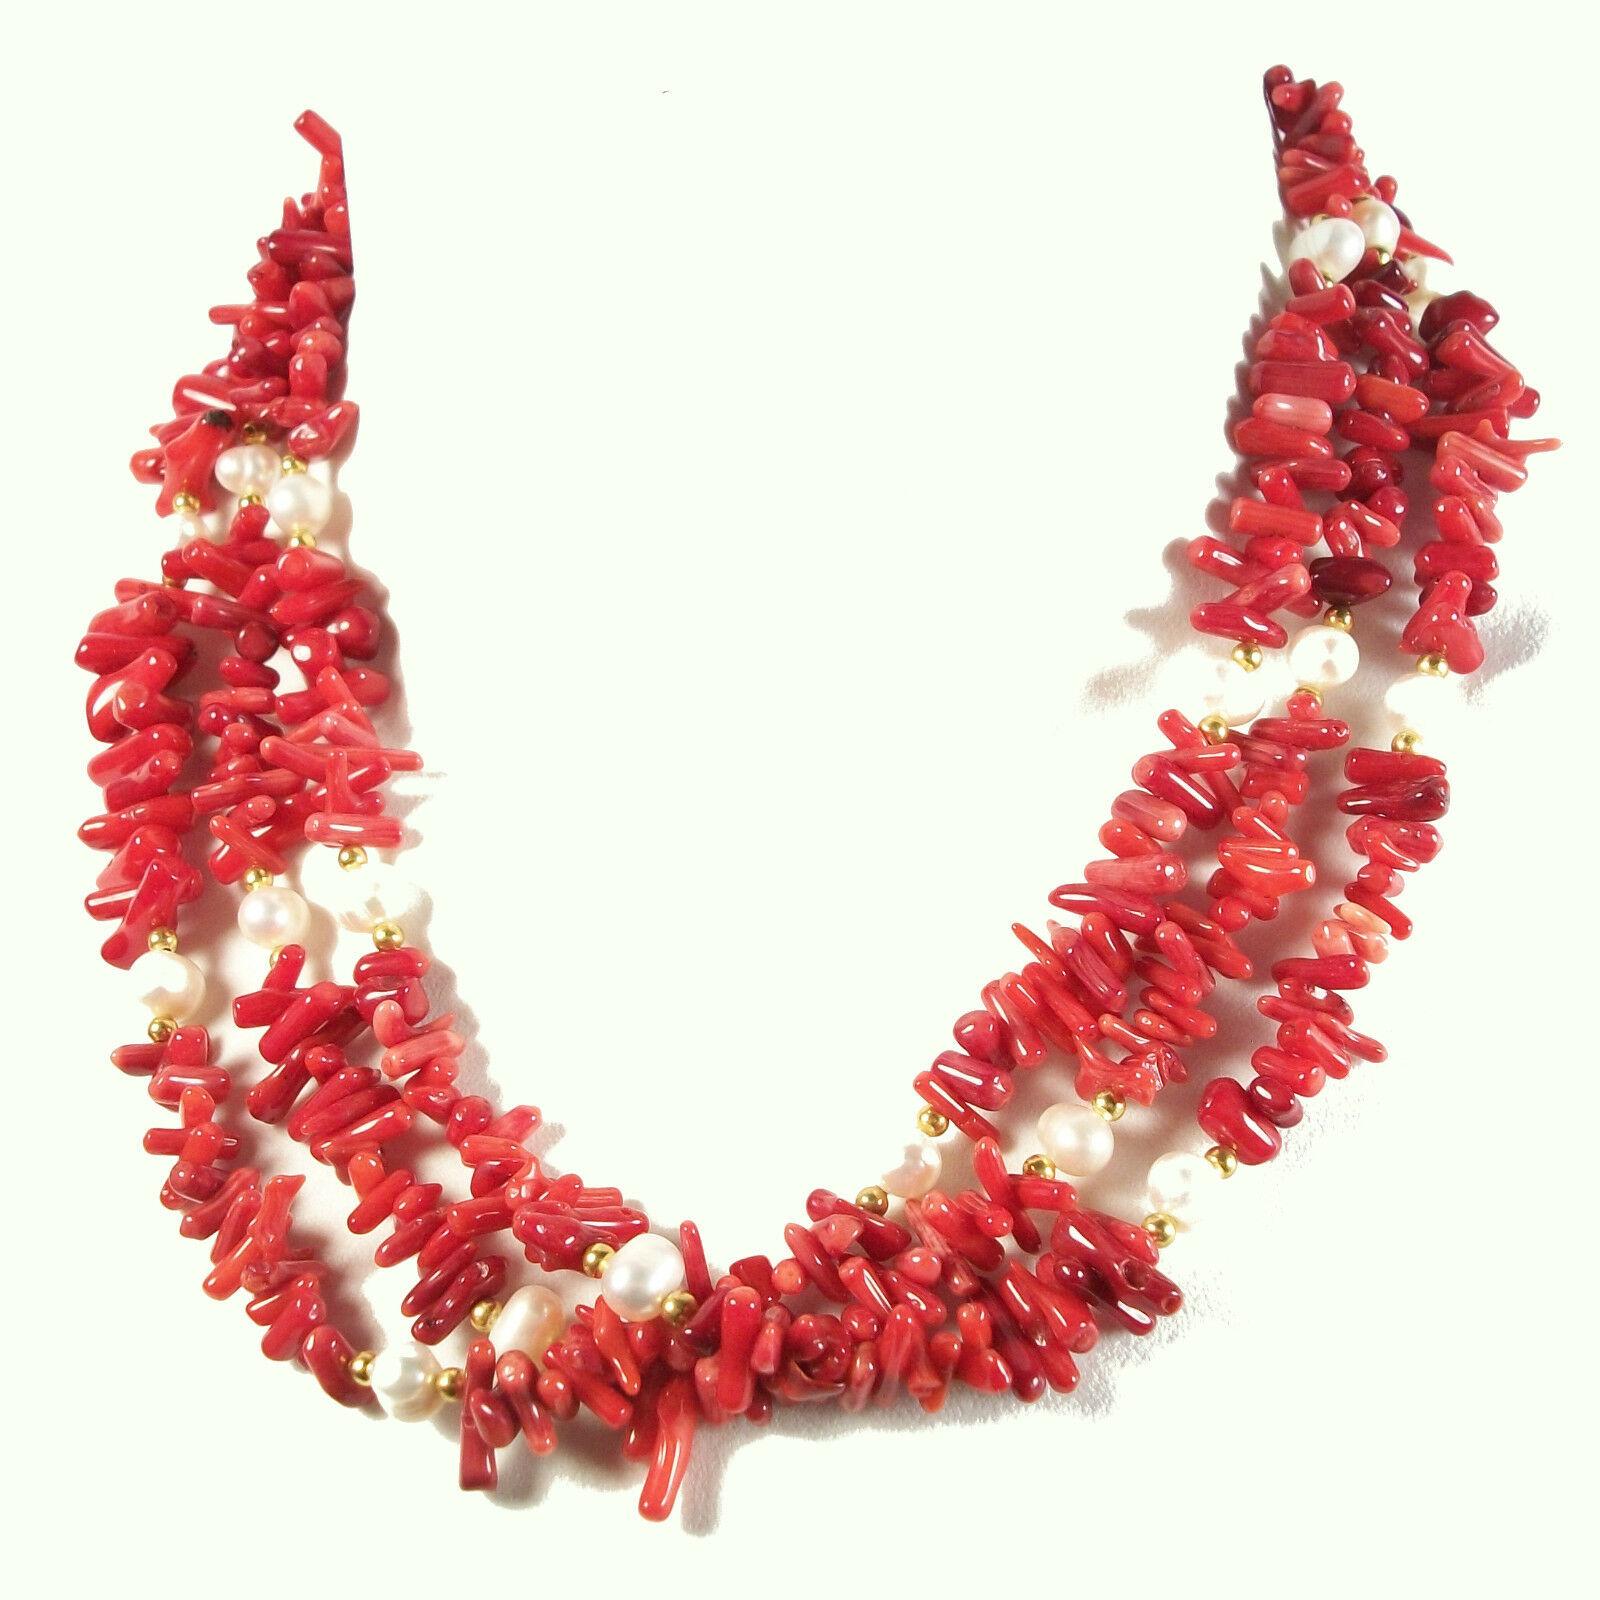 Vintage faux Sicilian red branch coral and faux pearl triple strand necklace - gold tone/brass beads/spacers and closure - unsigned - circa 1980's.

Excellent/mint vintage condition -  no loss - no damage - no repairs - ready to wear.

Size - 18